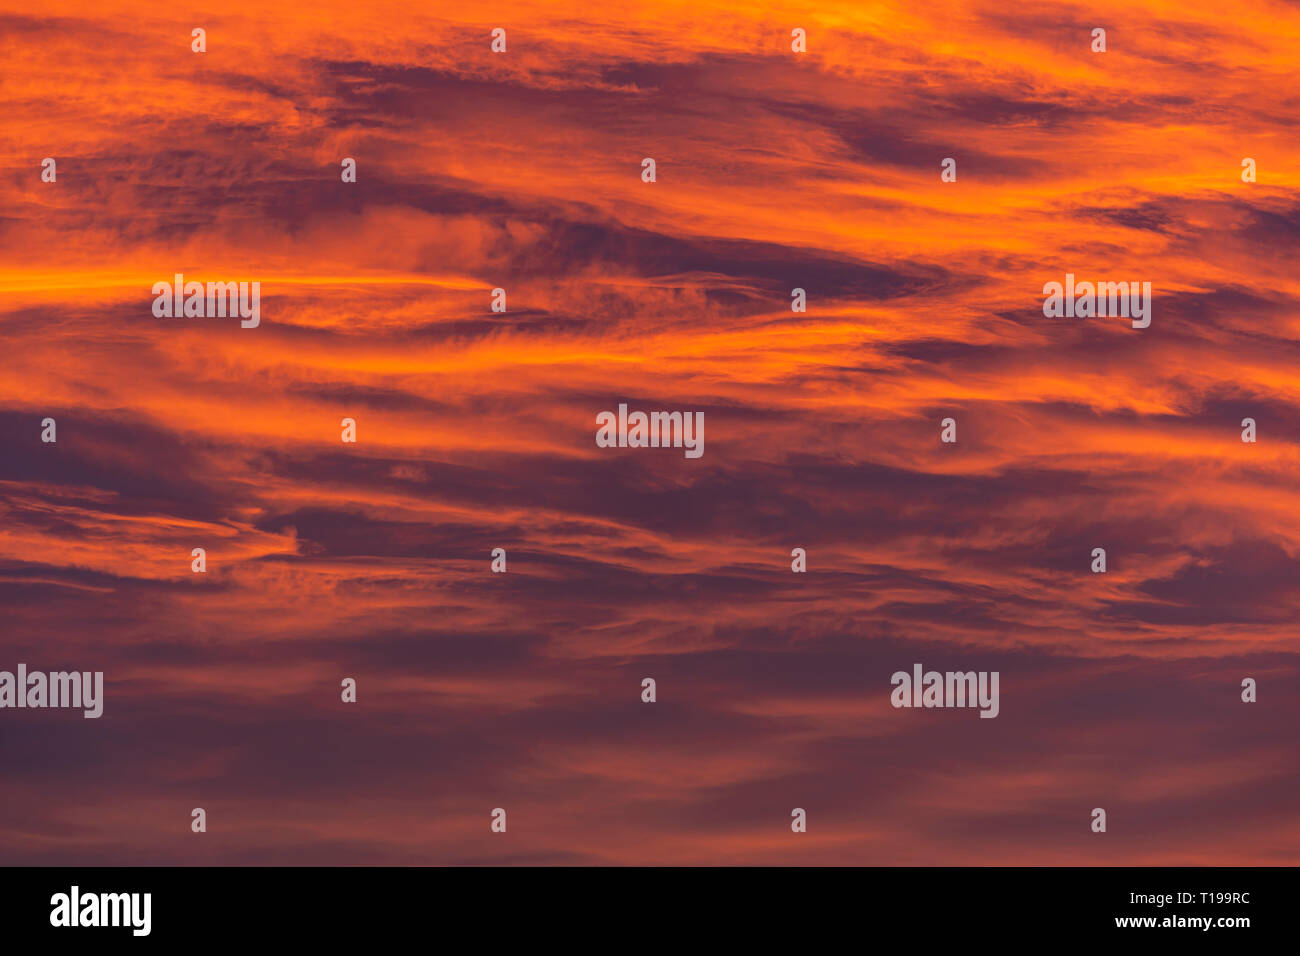 Glowing sunset sky with sureal deep orange and dark blue colors. Stock Photo